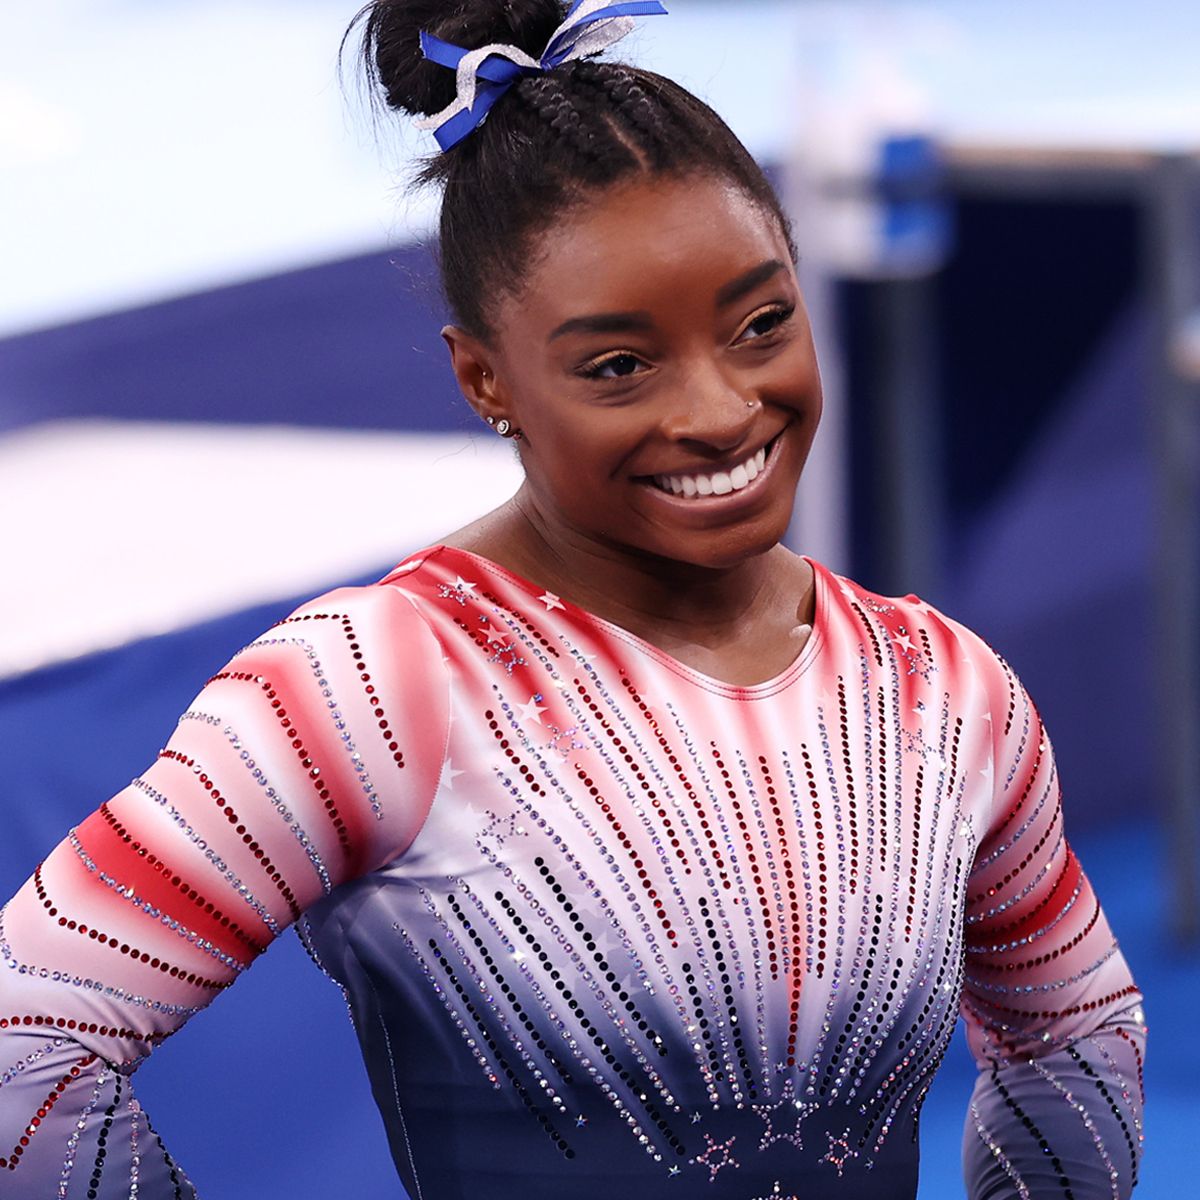 Simone Biles Is Making a Golden Return to Gymnastics: All the Details